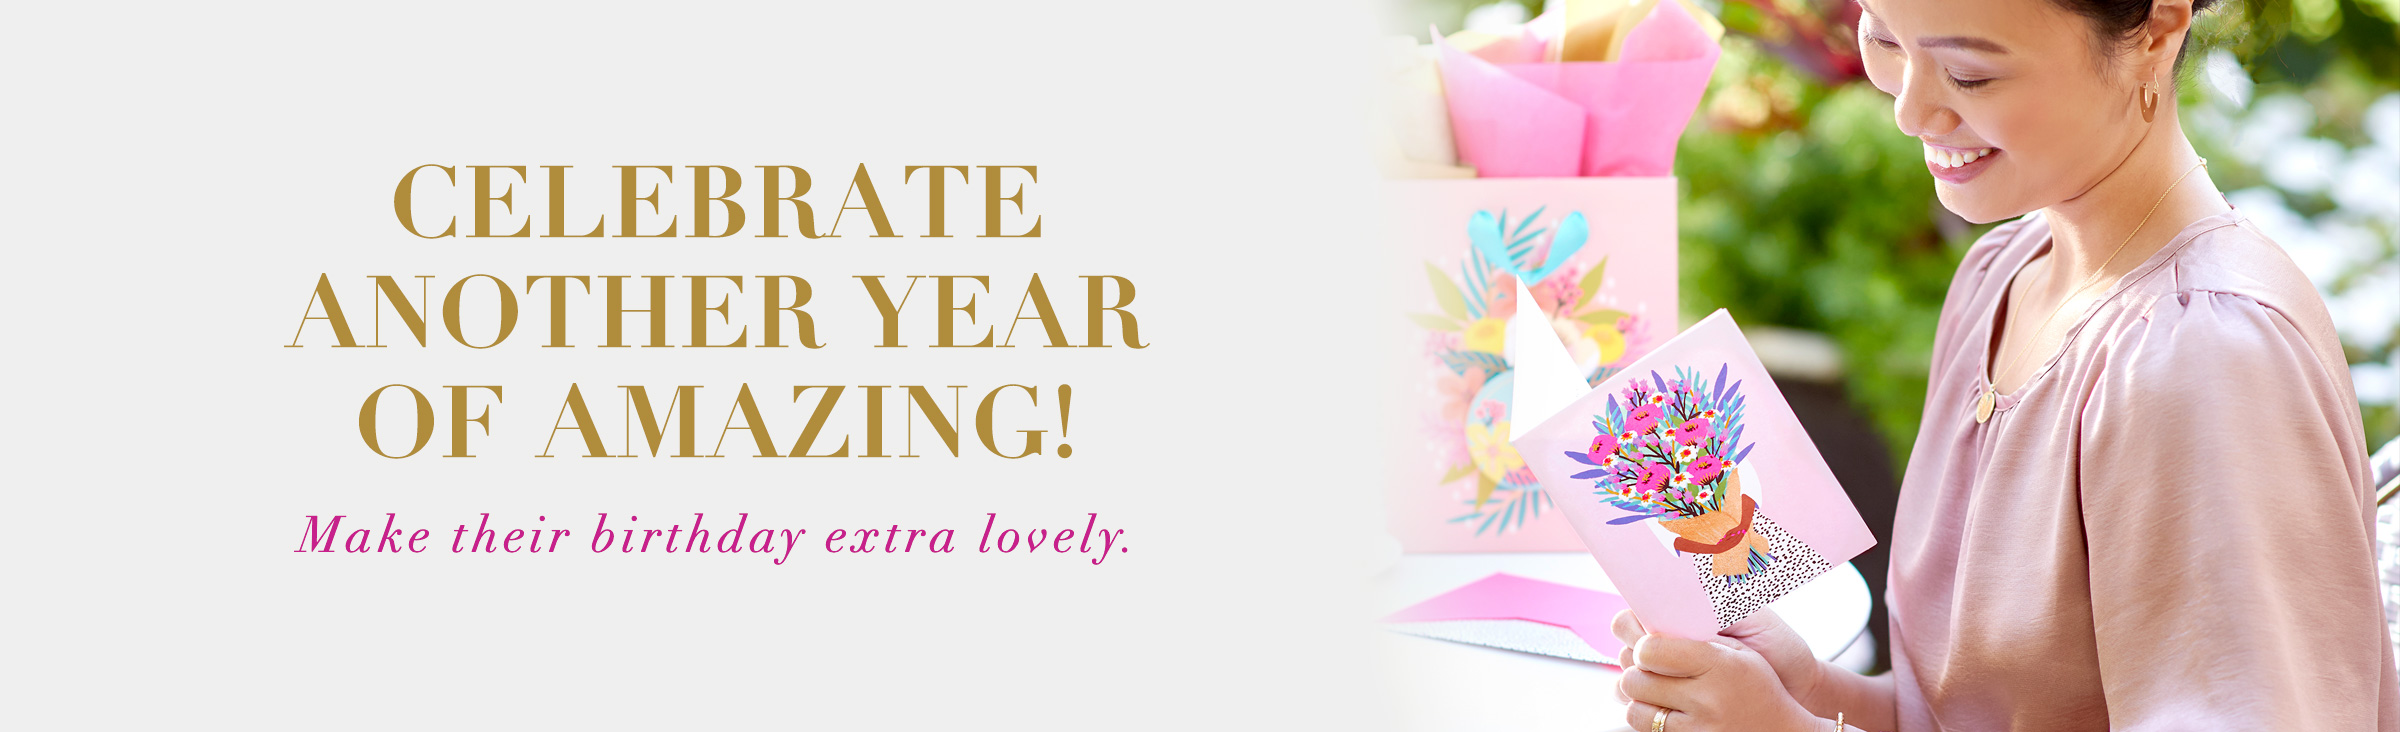 Celebrate another year of amazing! Make their birthday extra lovely.